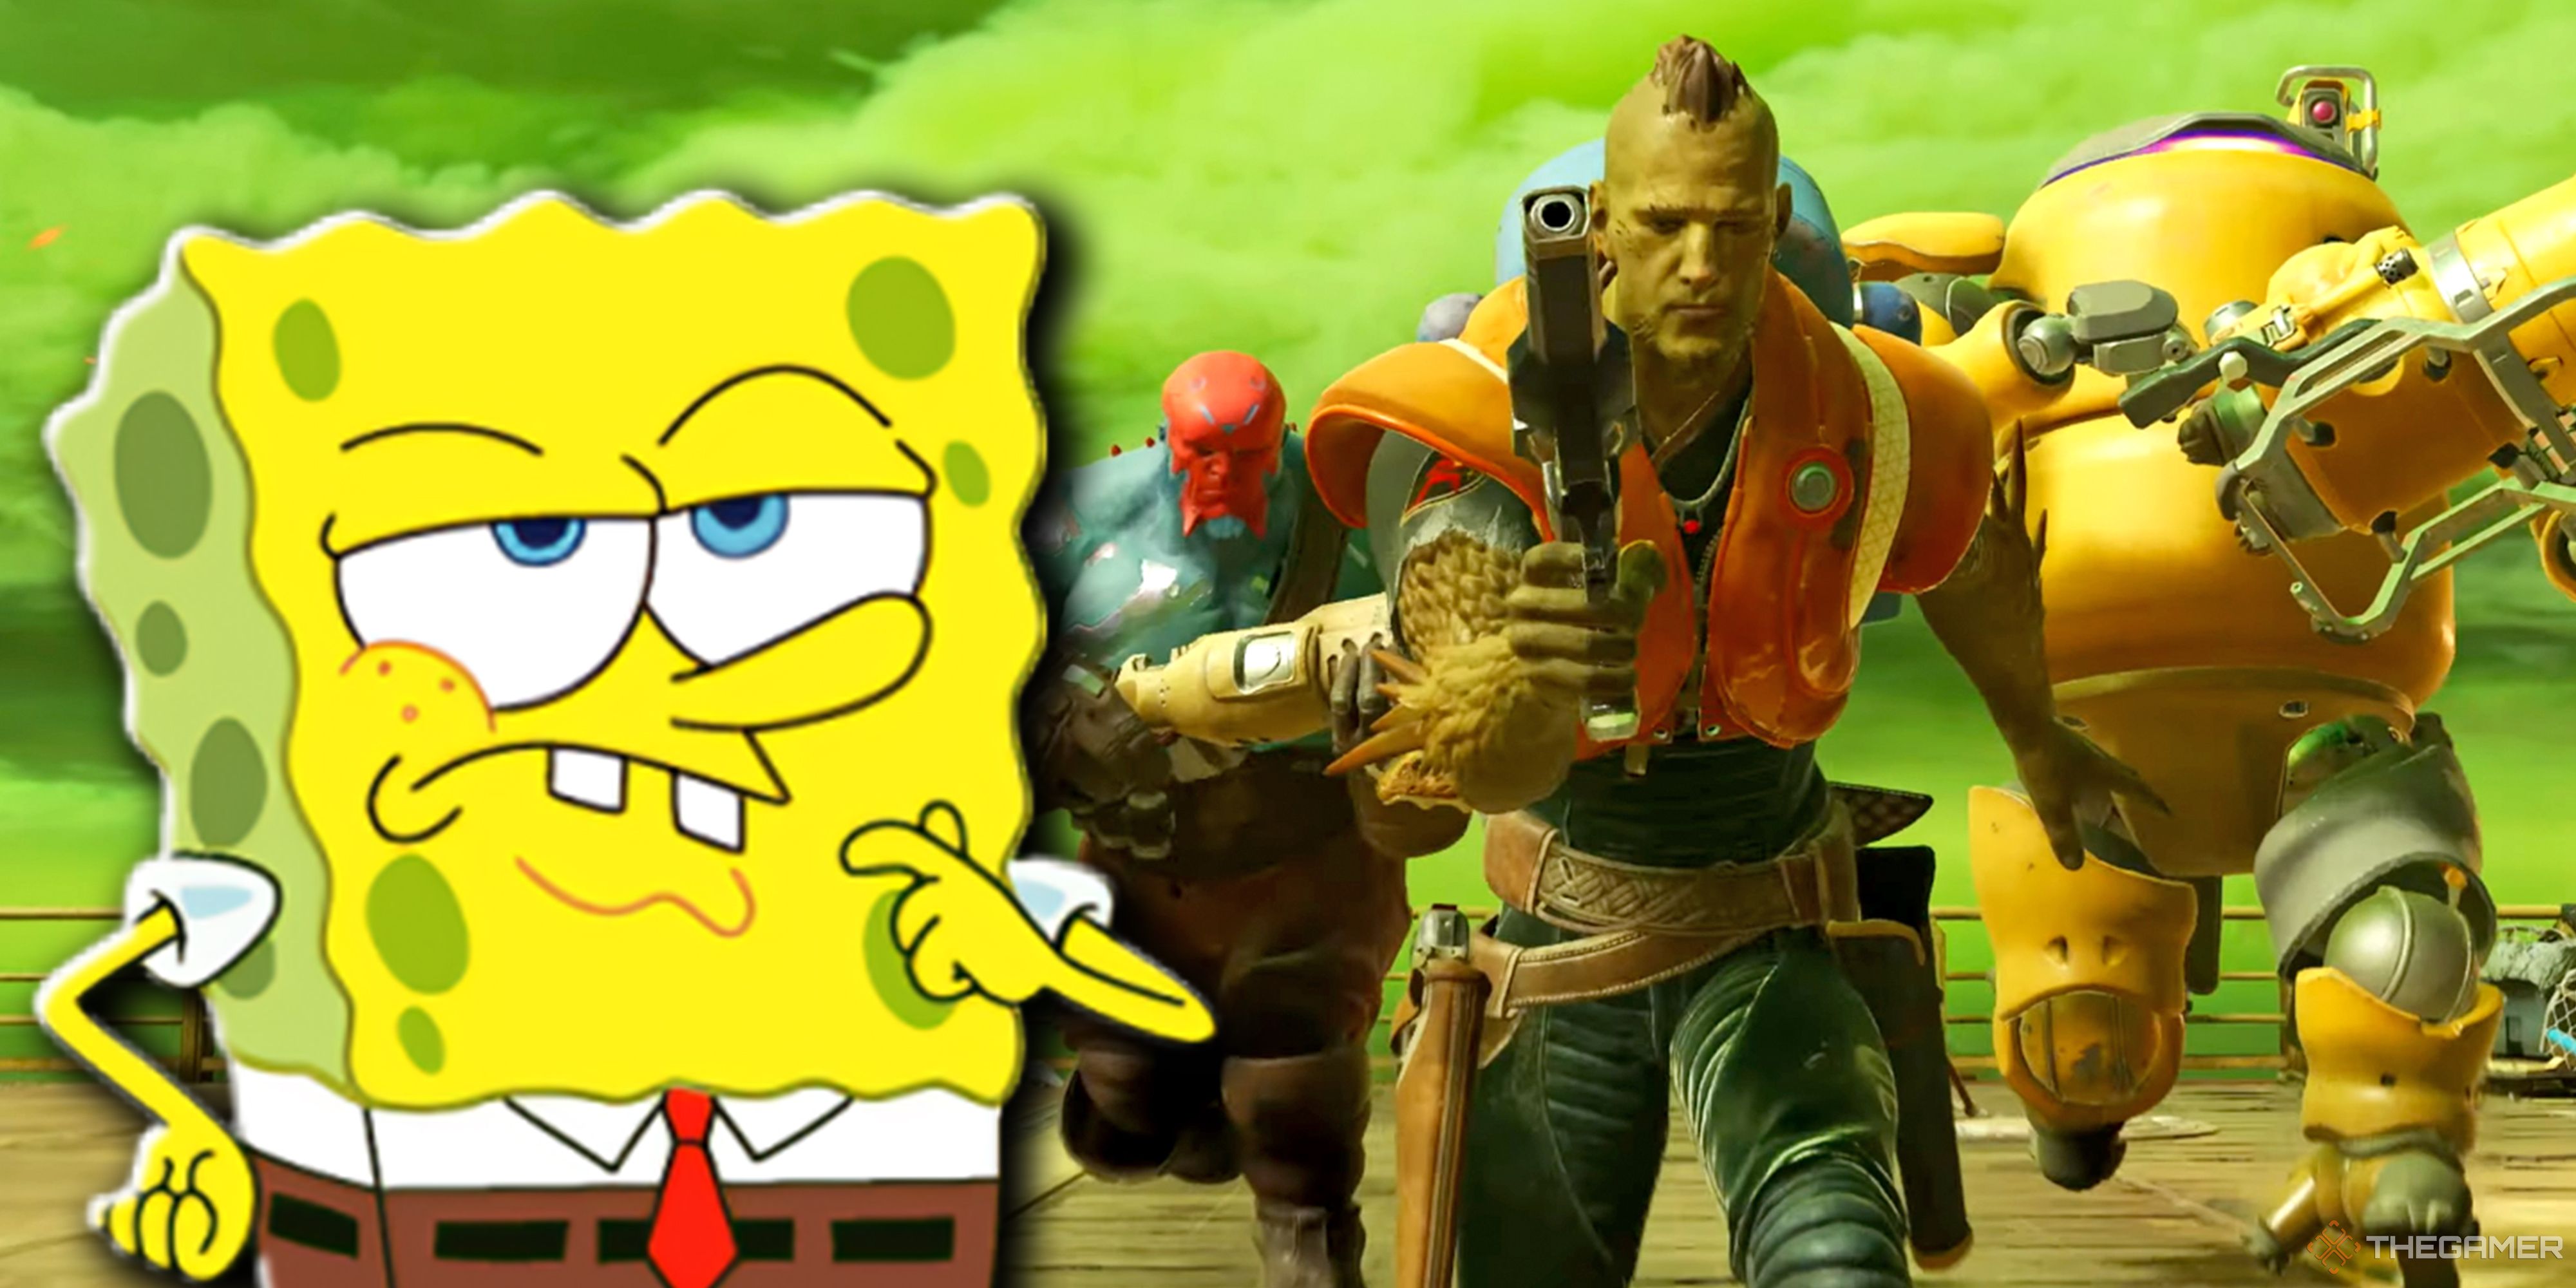 Spongebob making a sceptical expression while looking at Concord's characters running